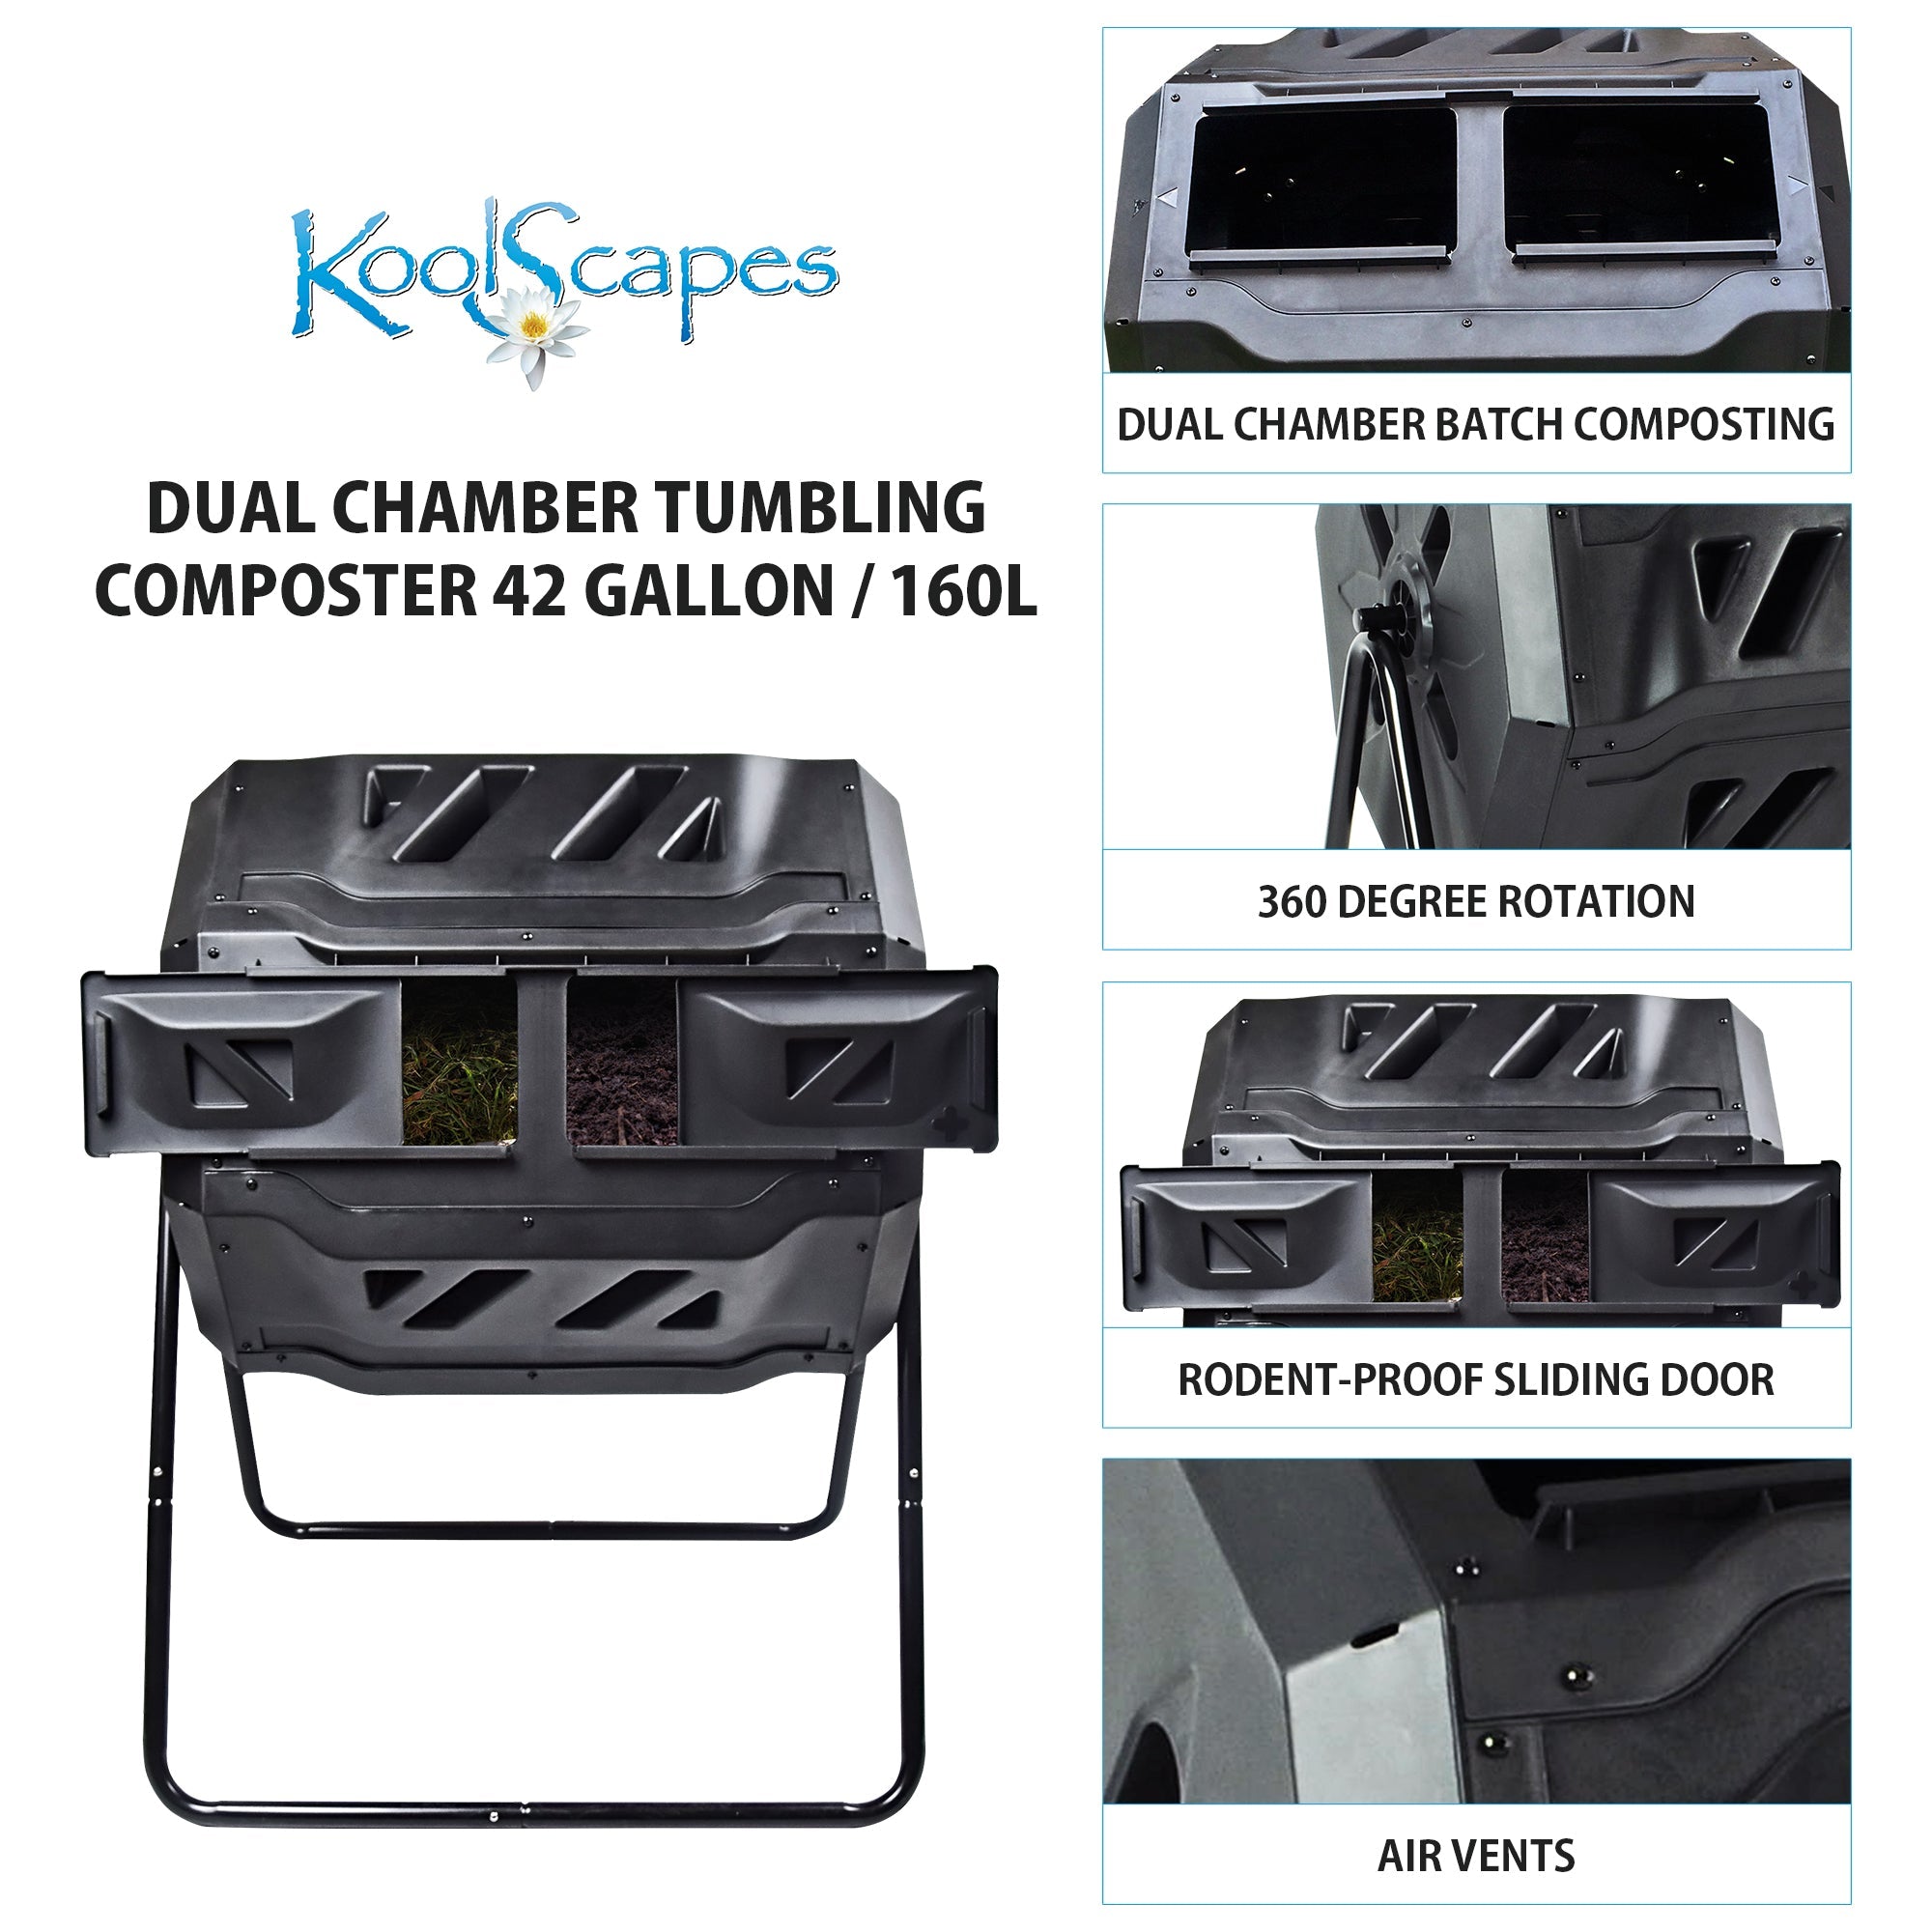 On the left is a product shot of twin chamber tumbling composter on a white background with text above reading, "Koolscapes dual chamber tumbling composter 42 gallon/160L." On the right are four closeup images of parts, labeled: Dual chamber batch composting; 360 degree rotation; rodent-proof sliding door; air vents